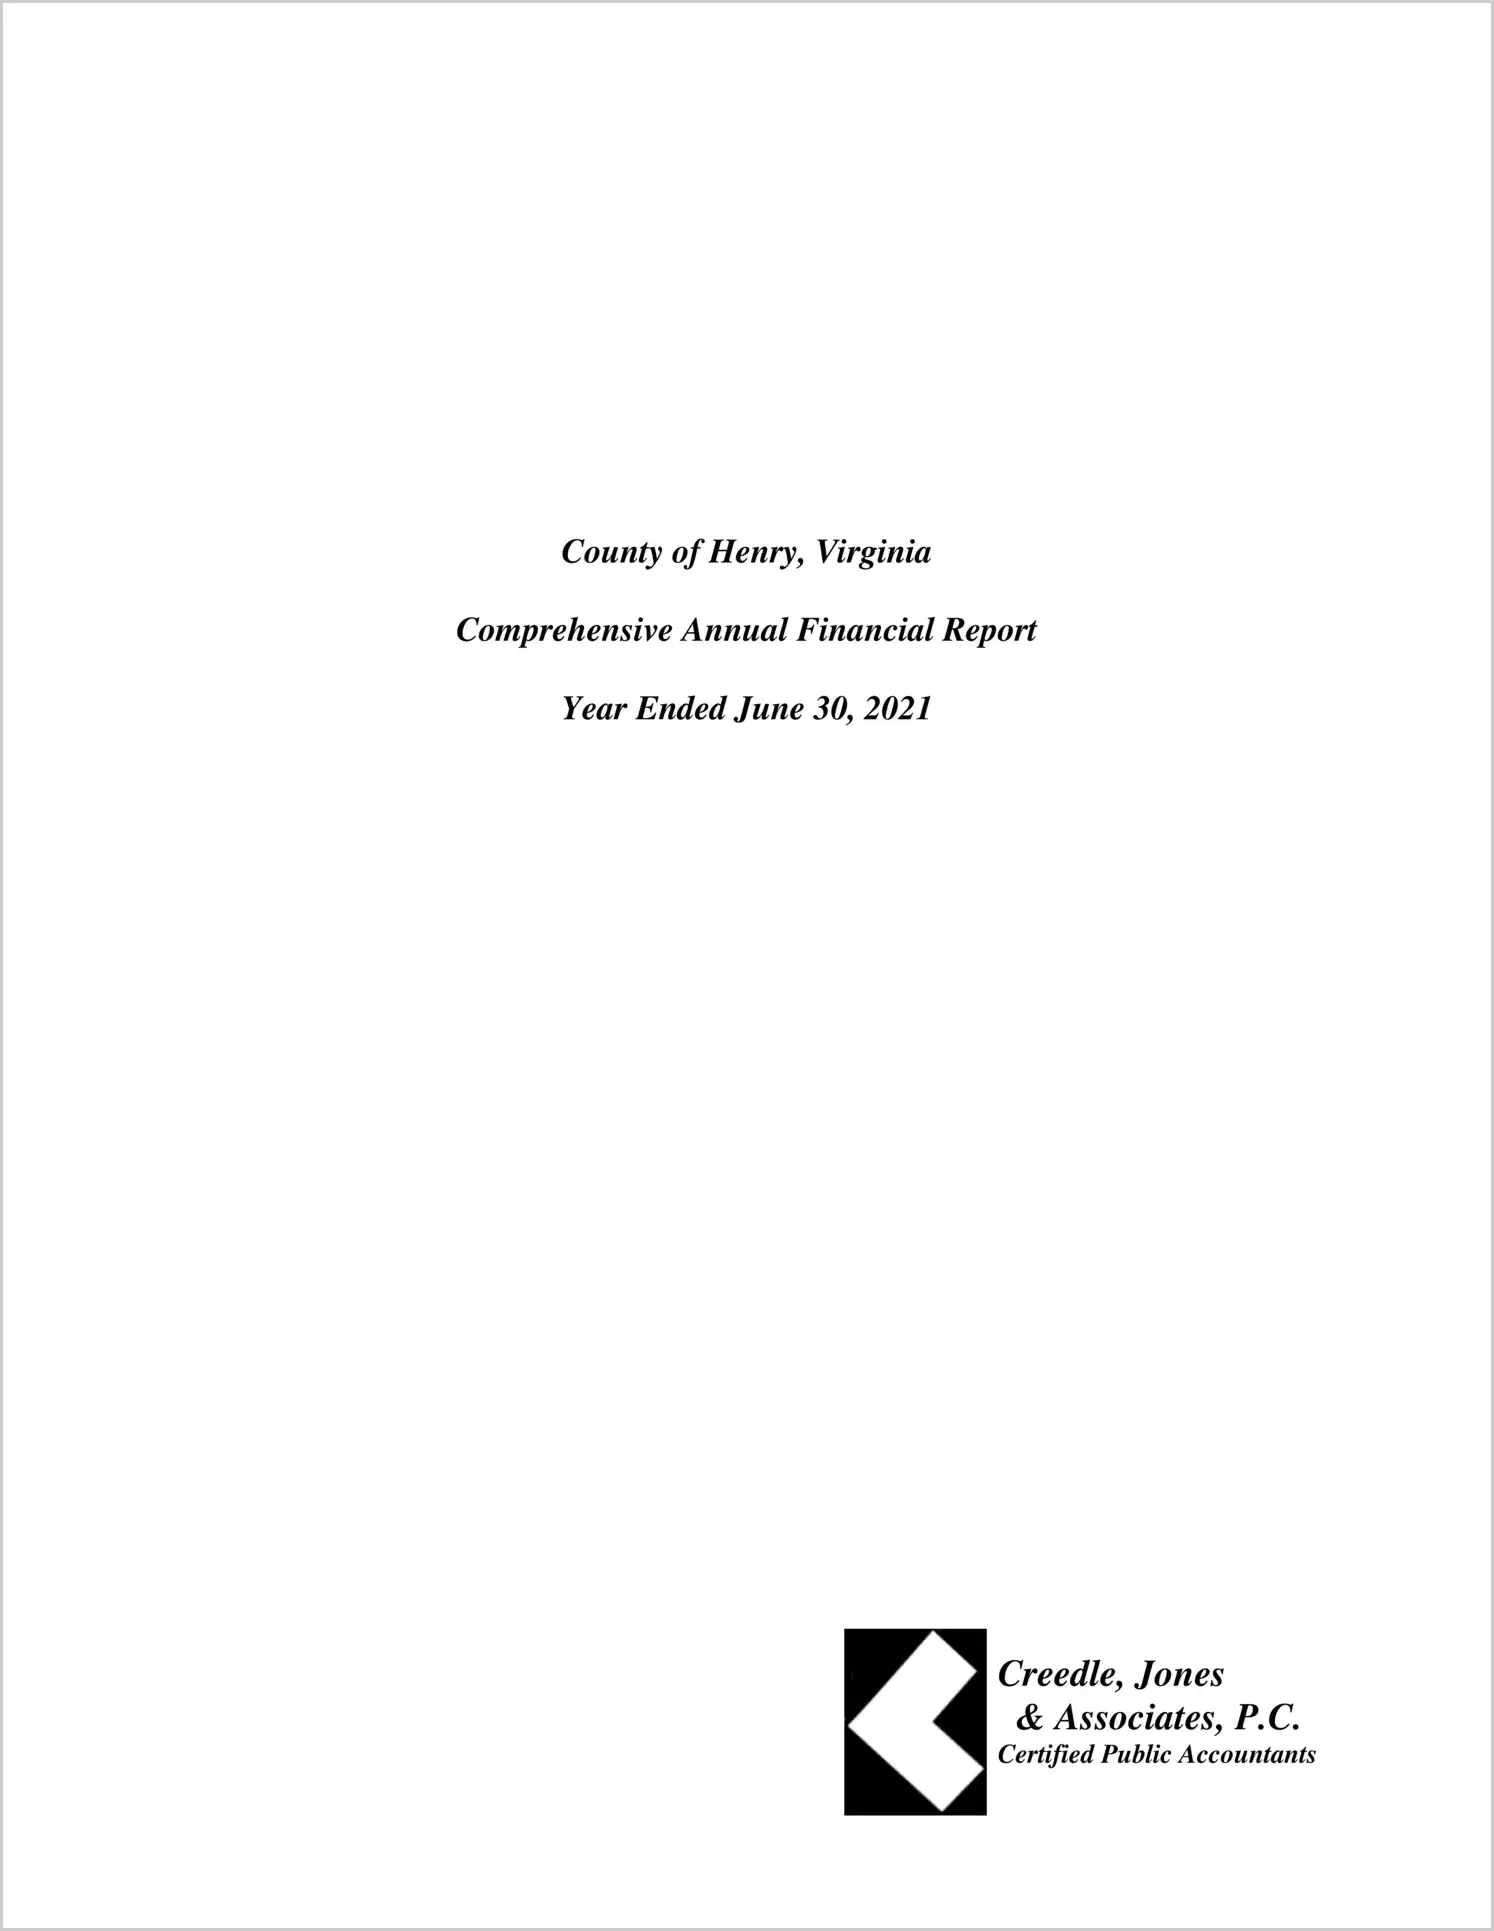 2021 Annual Financial Report for County of Henry